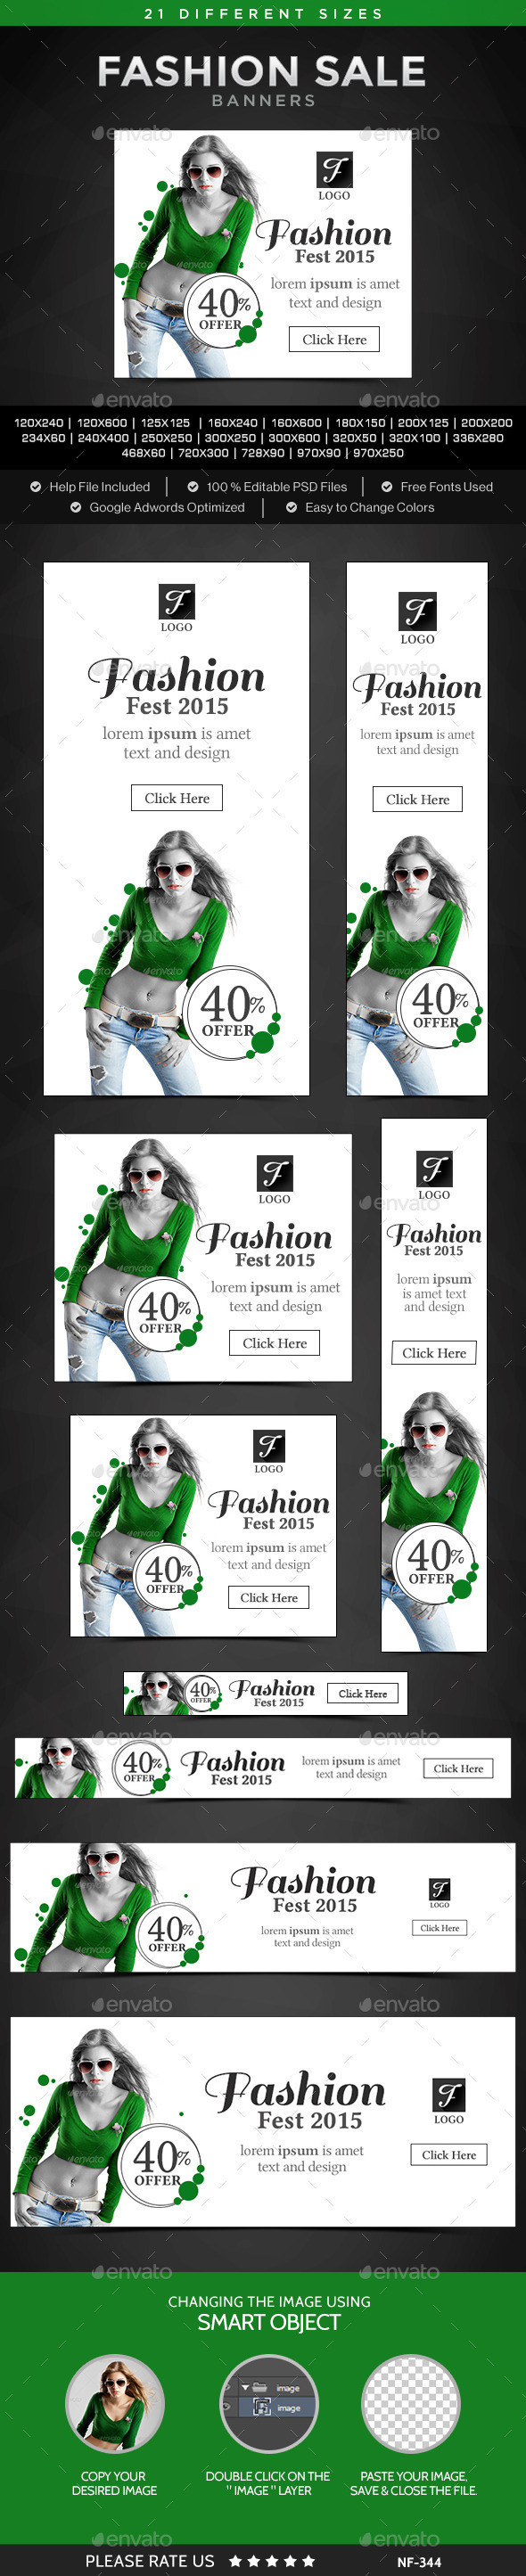 Nf 344 fashion 20sale 20banners preview